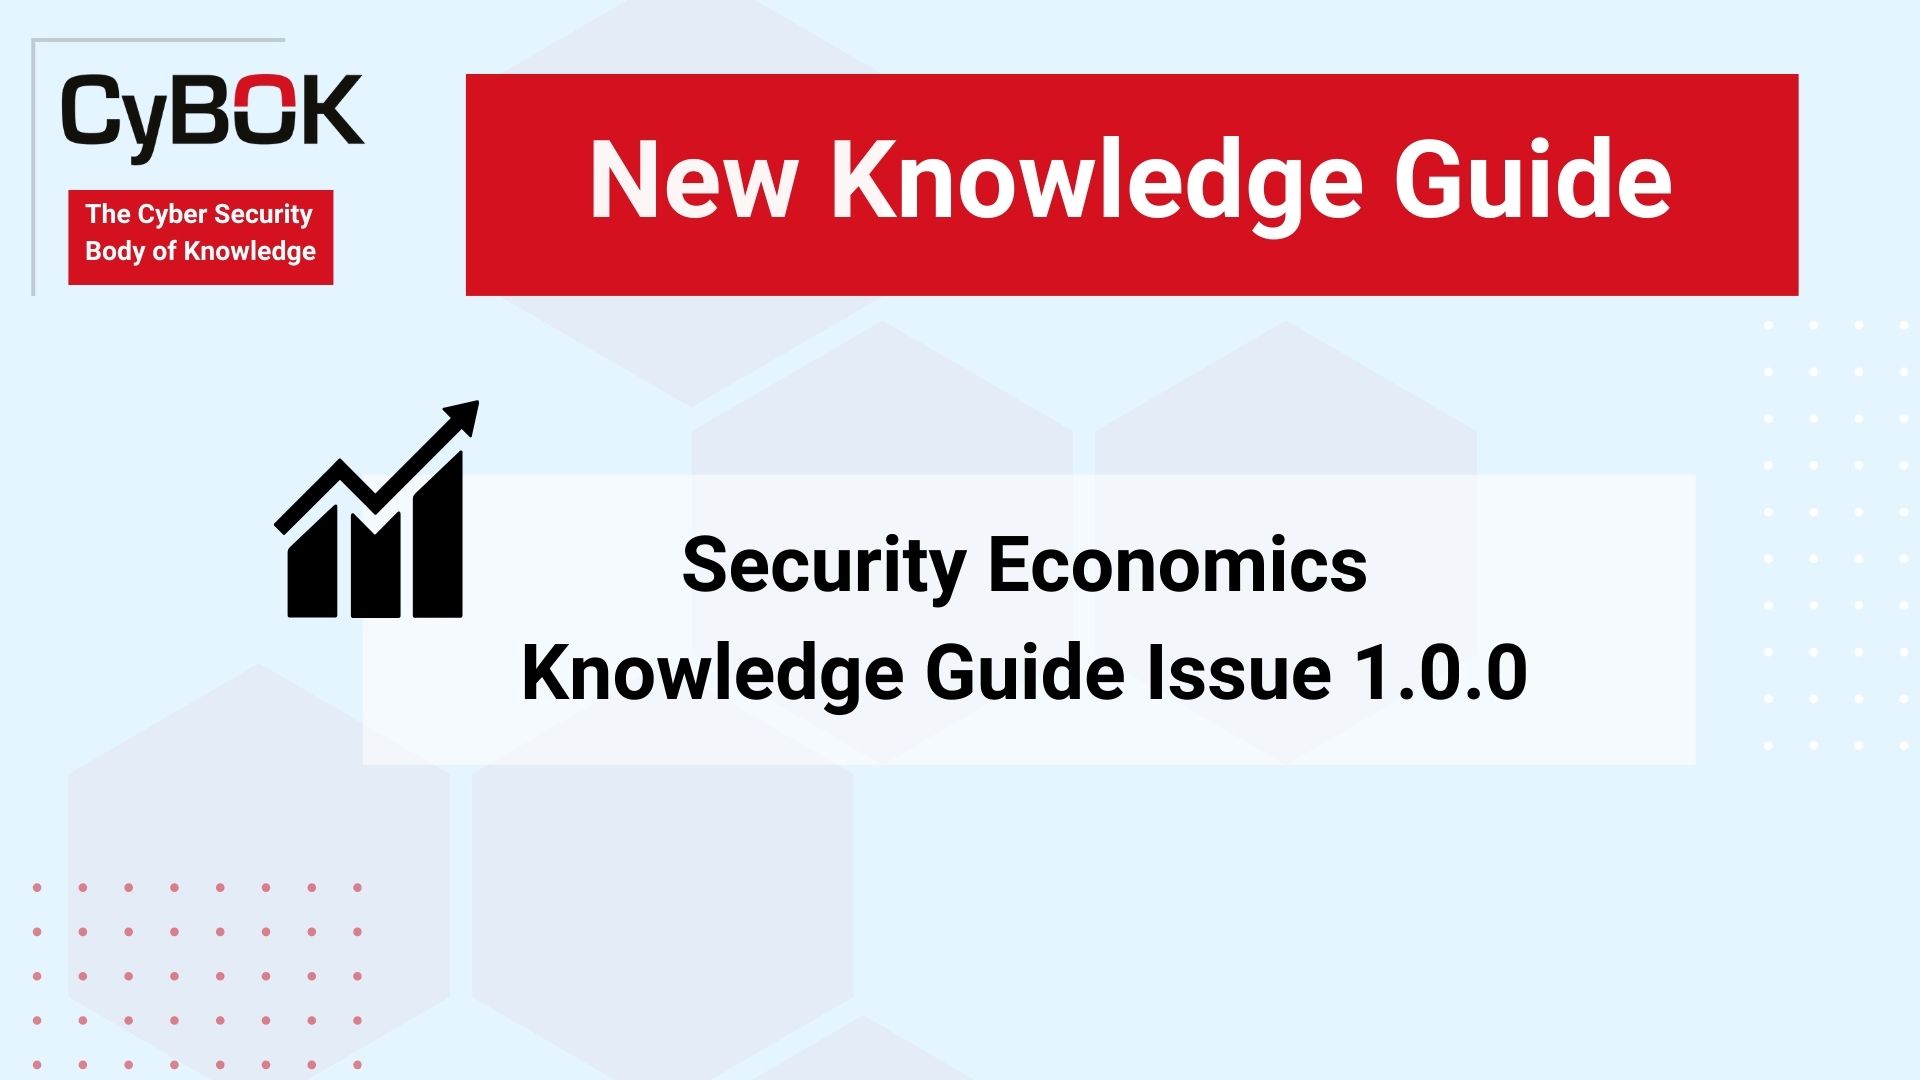 CyBOK Unveils New Knowledge Guide on Security Economics